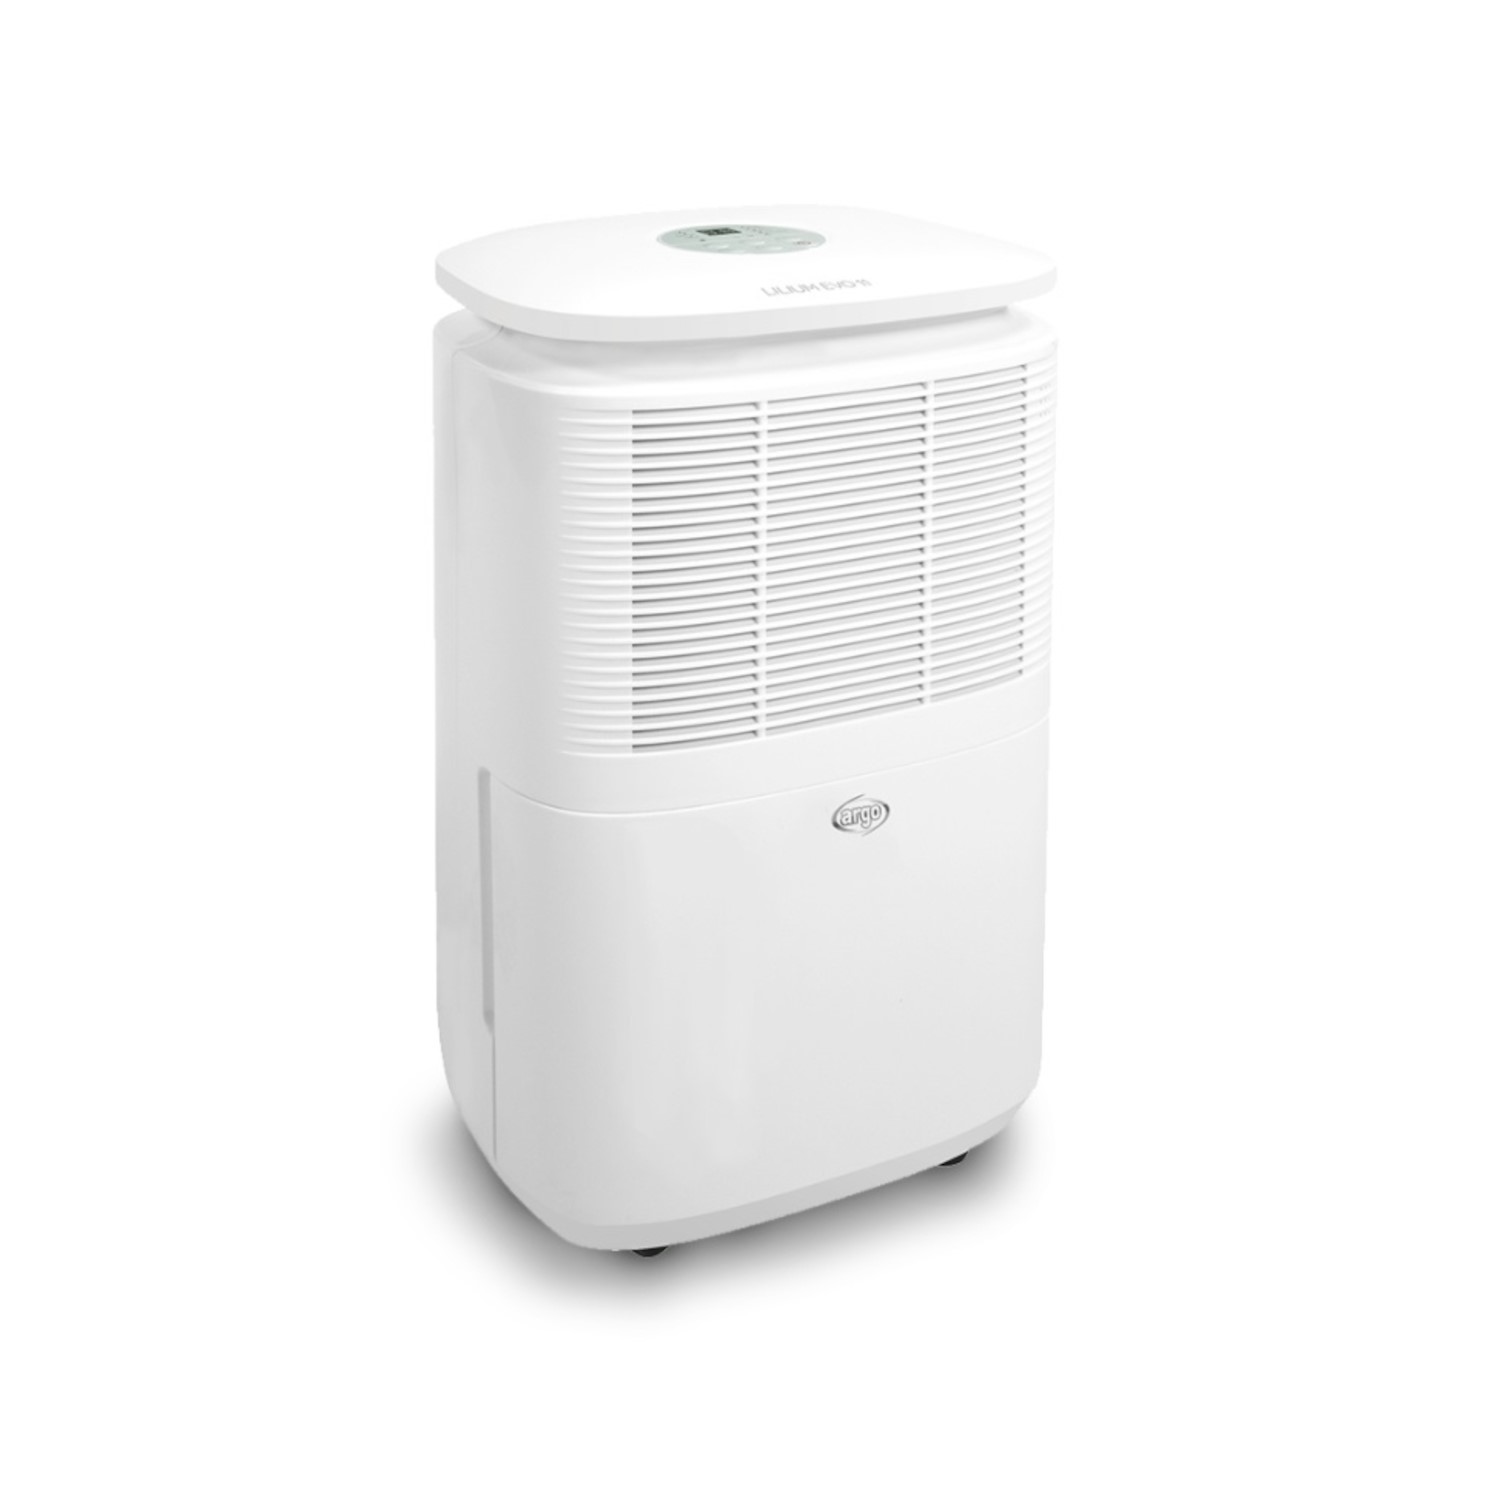 Argo 10 Litre Dehumidifier with Laundry Digital Humidistat and Anti Dust filter